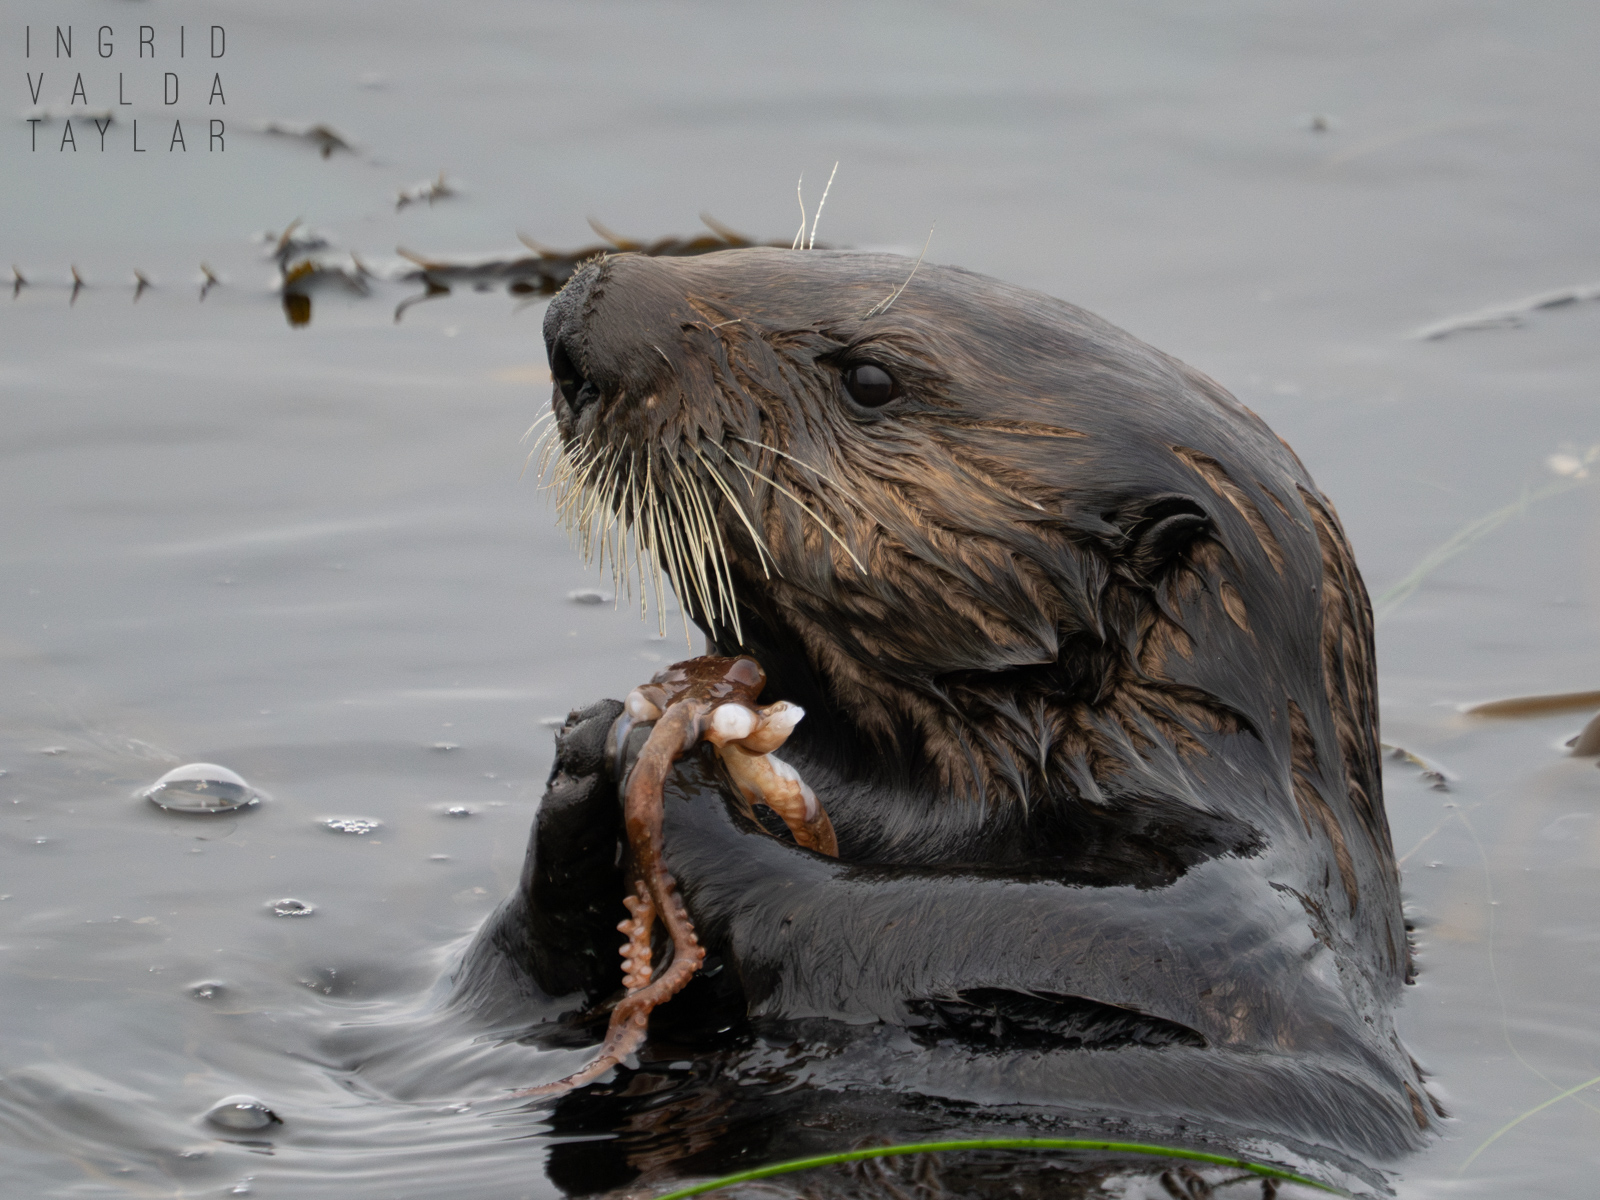 Southern sea otter with large cluster of mussels on Monterey Bay